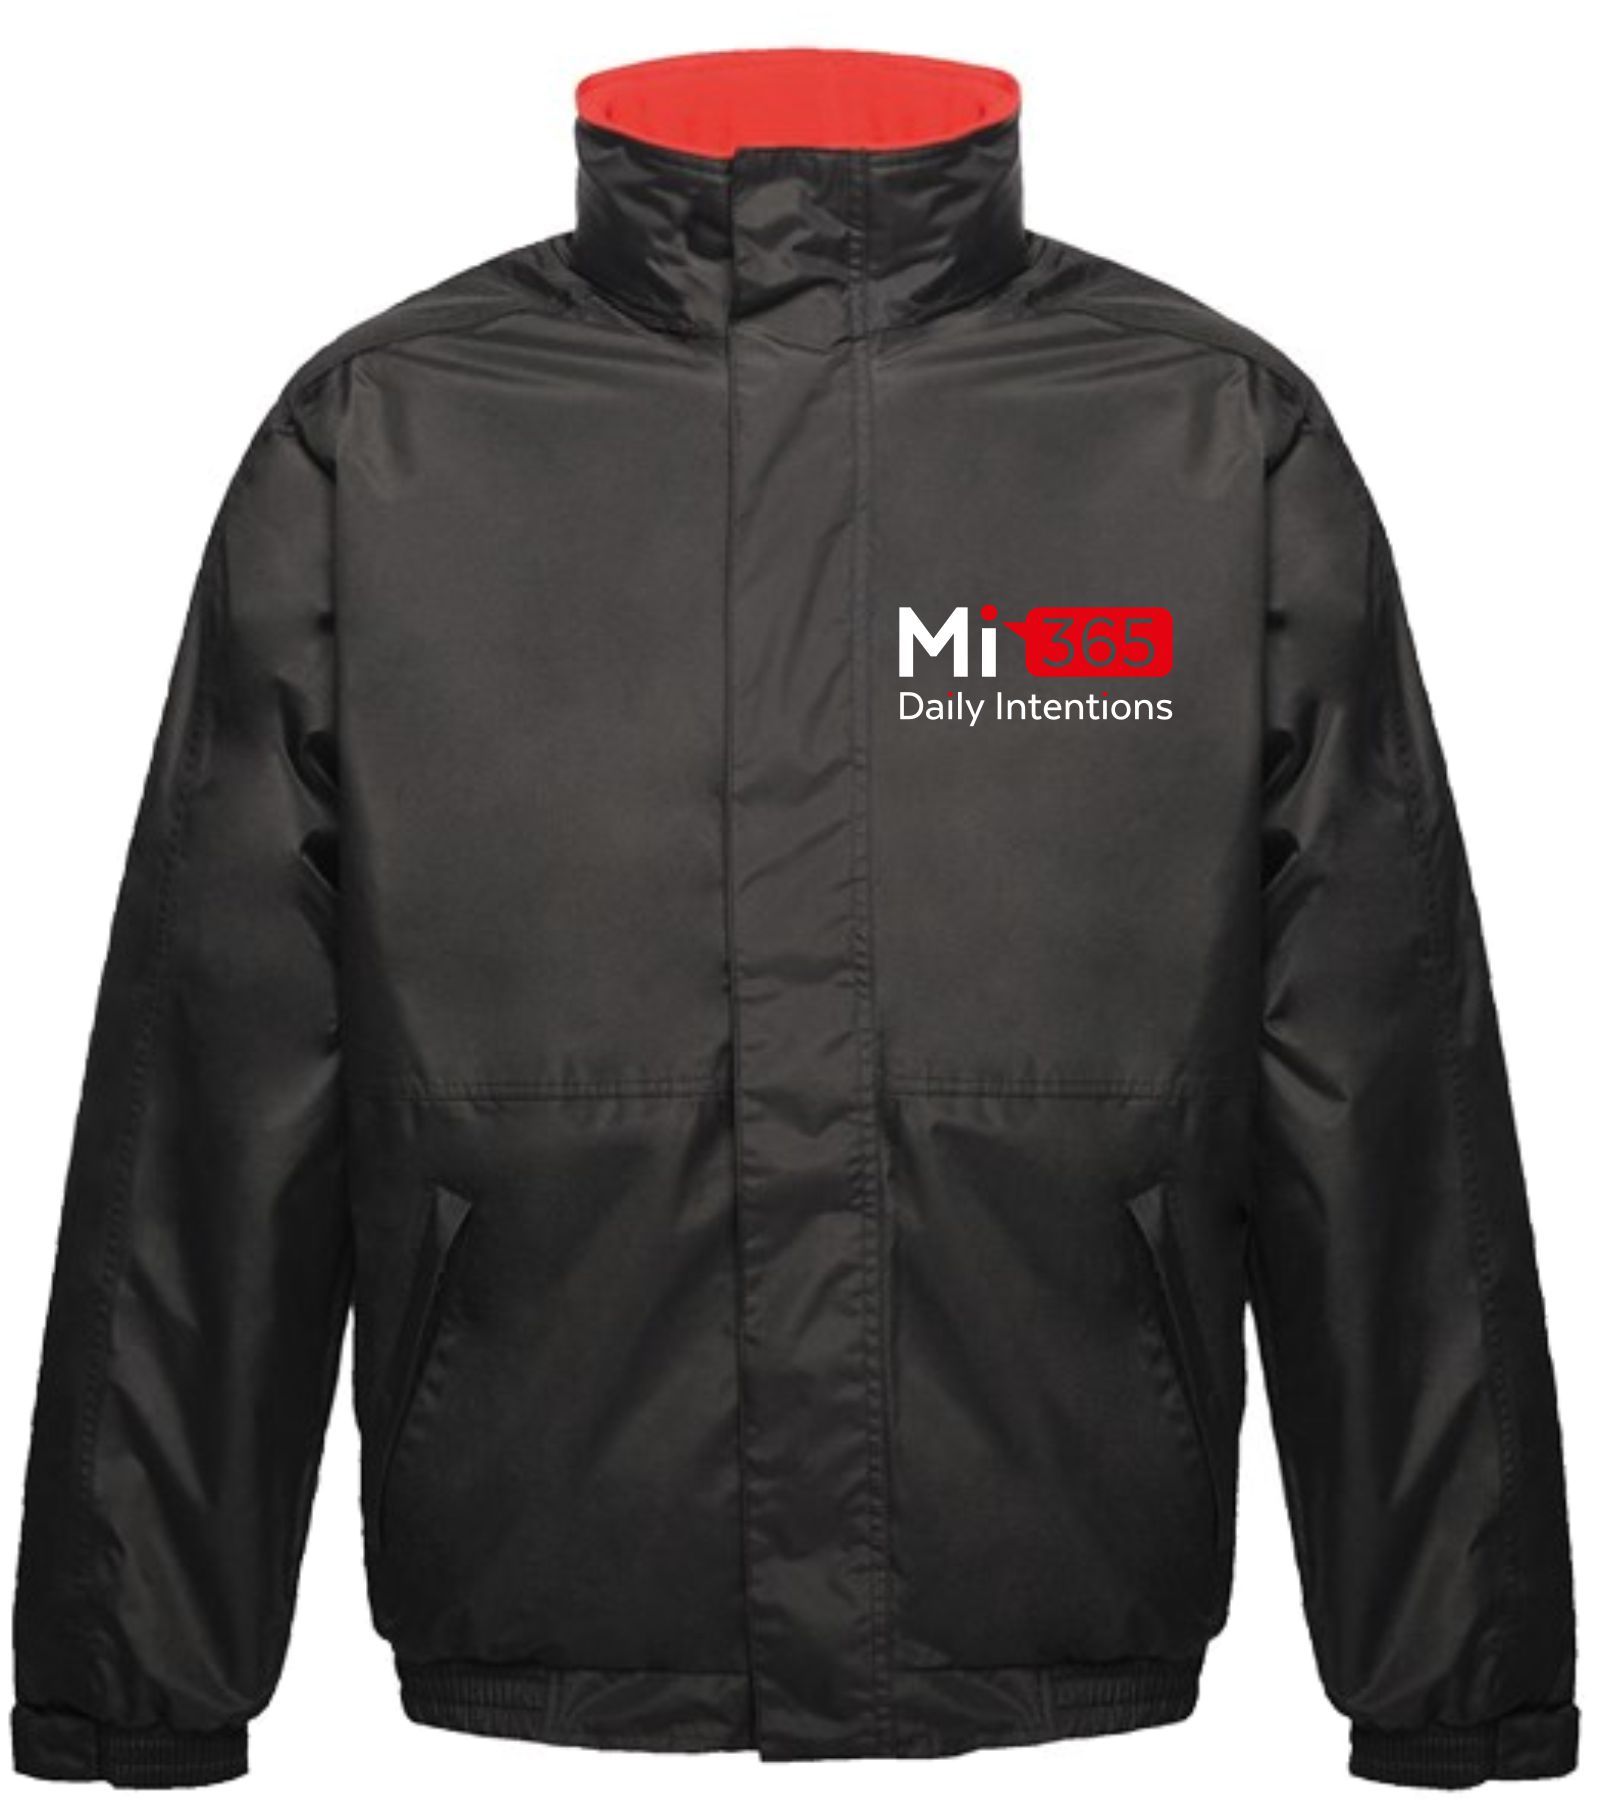 Mi365 Daily Intentions - Bomber jacket